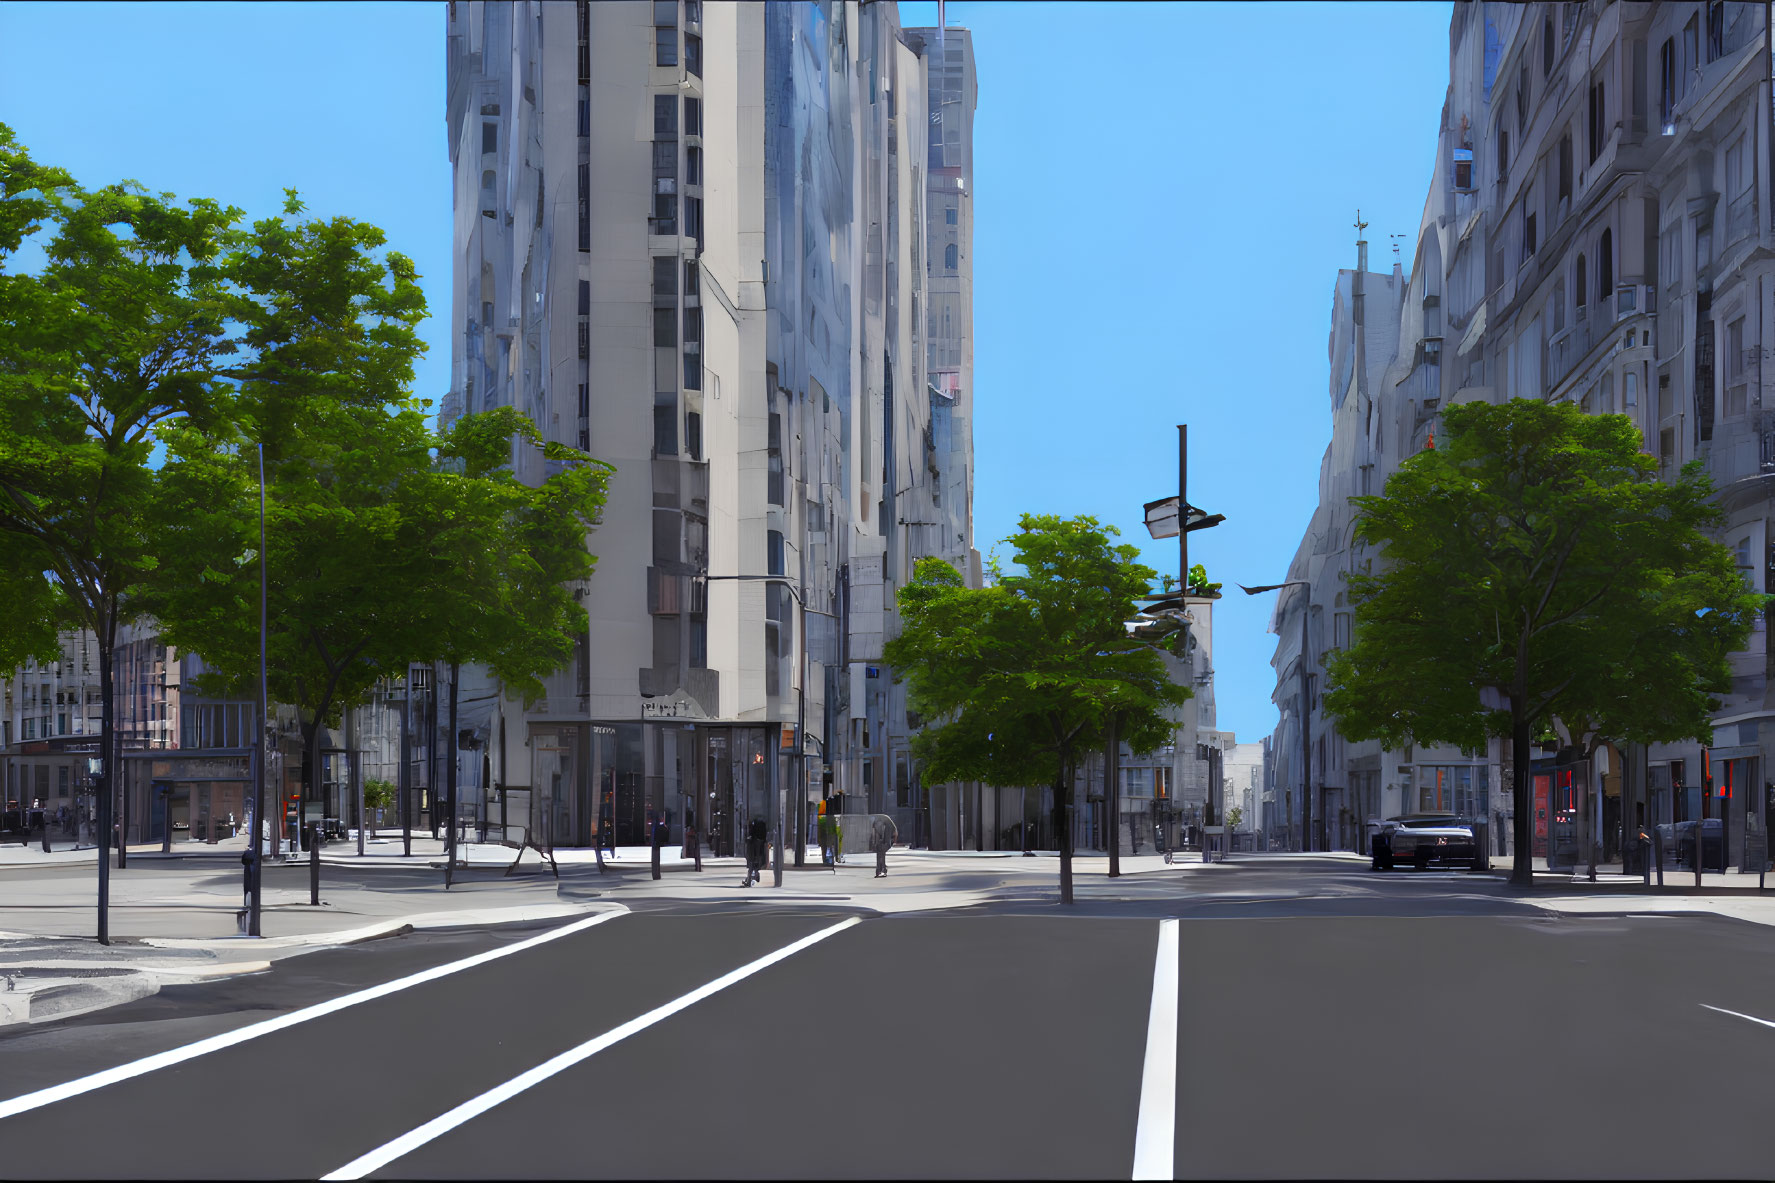 Urban street scene with modern and classical buildings, green trees, crosswalks, and minimal car traffic